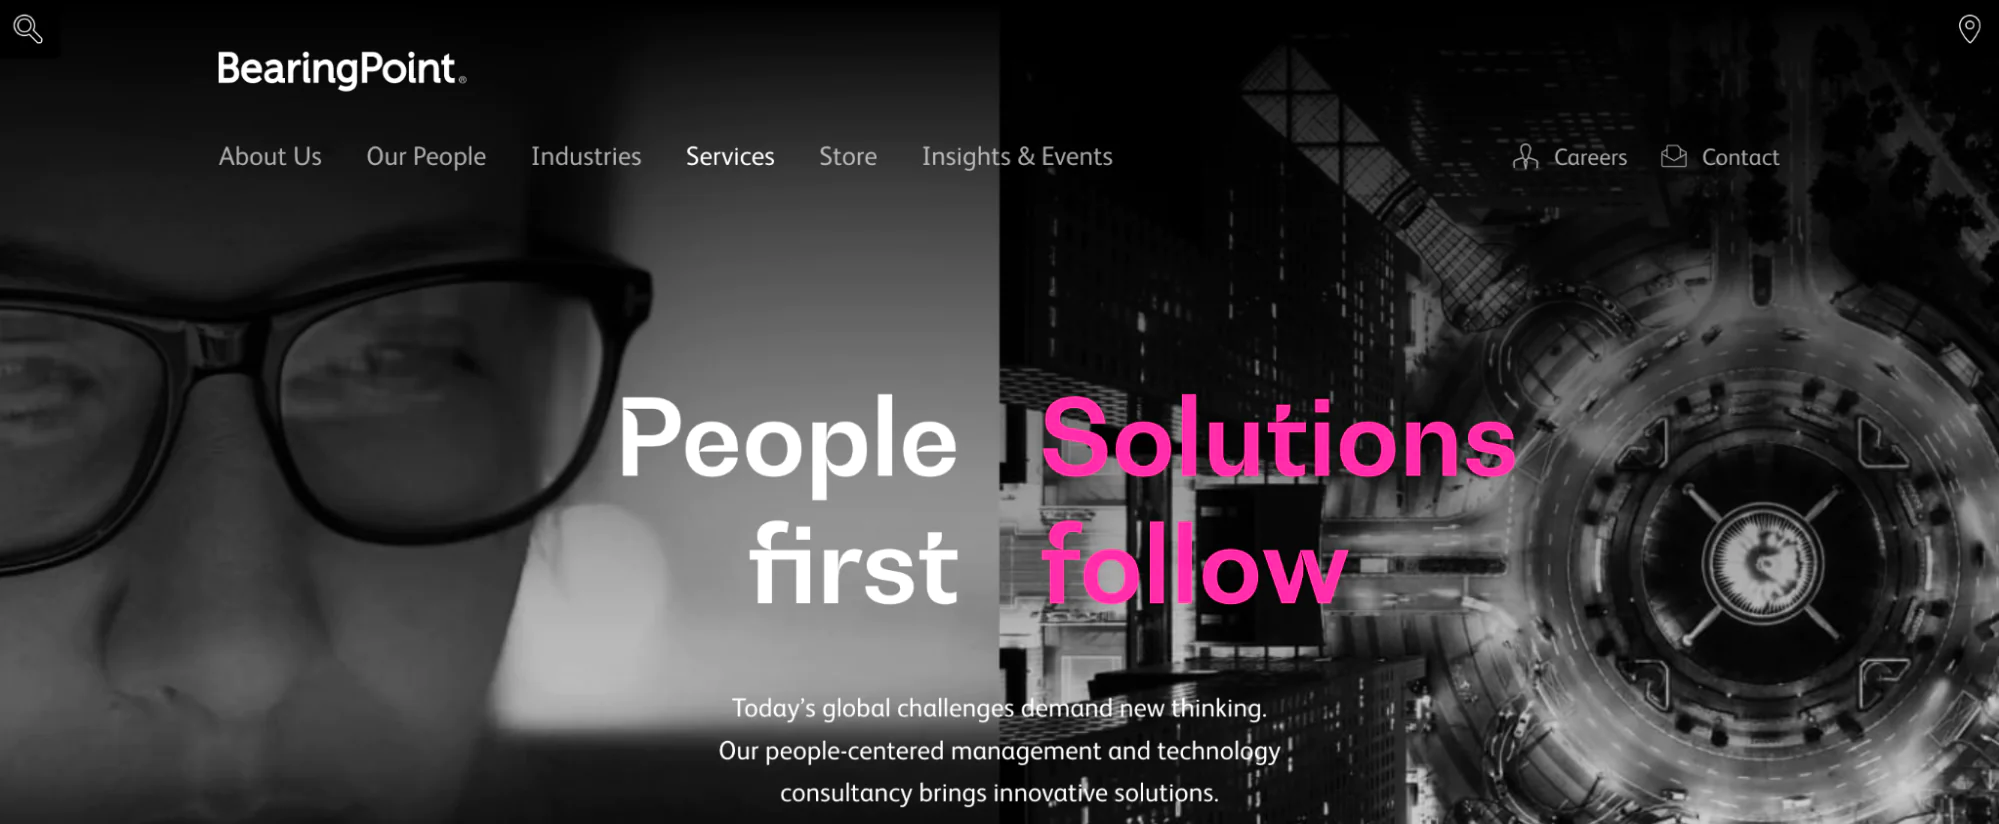 BearingPoint consultants’ homepage with black and white images showing clients at work.